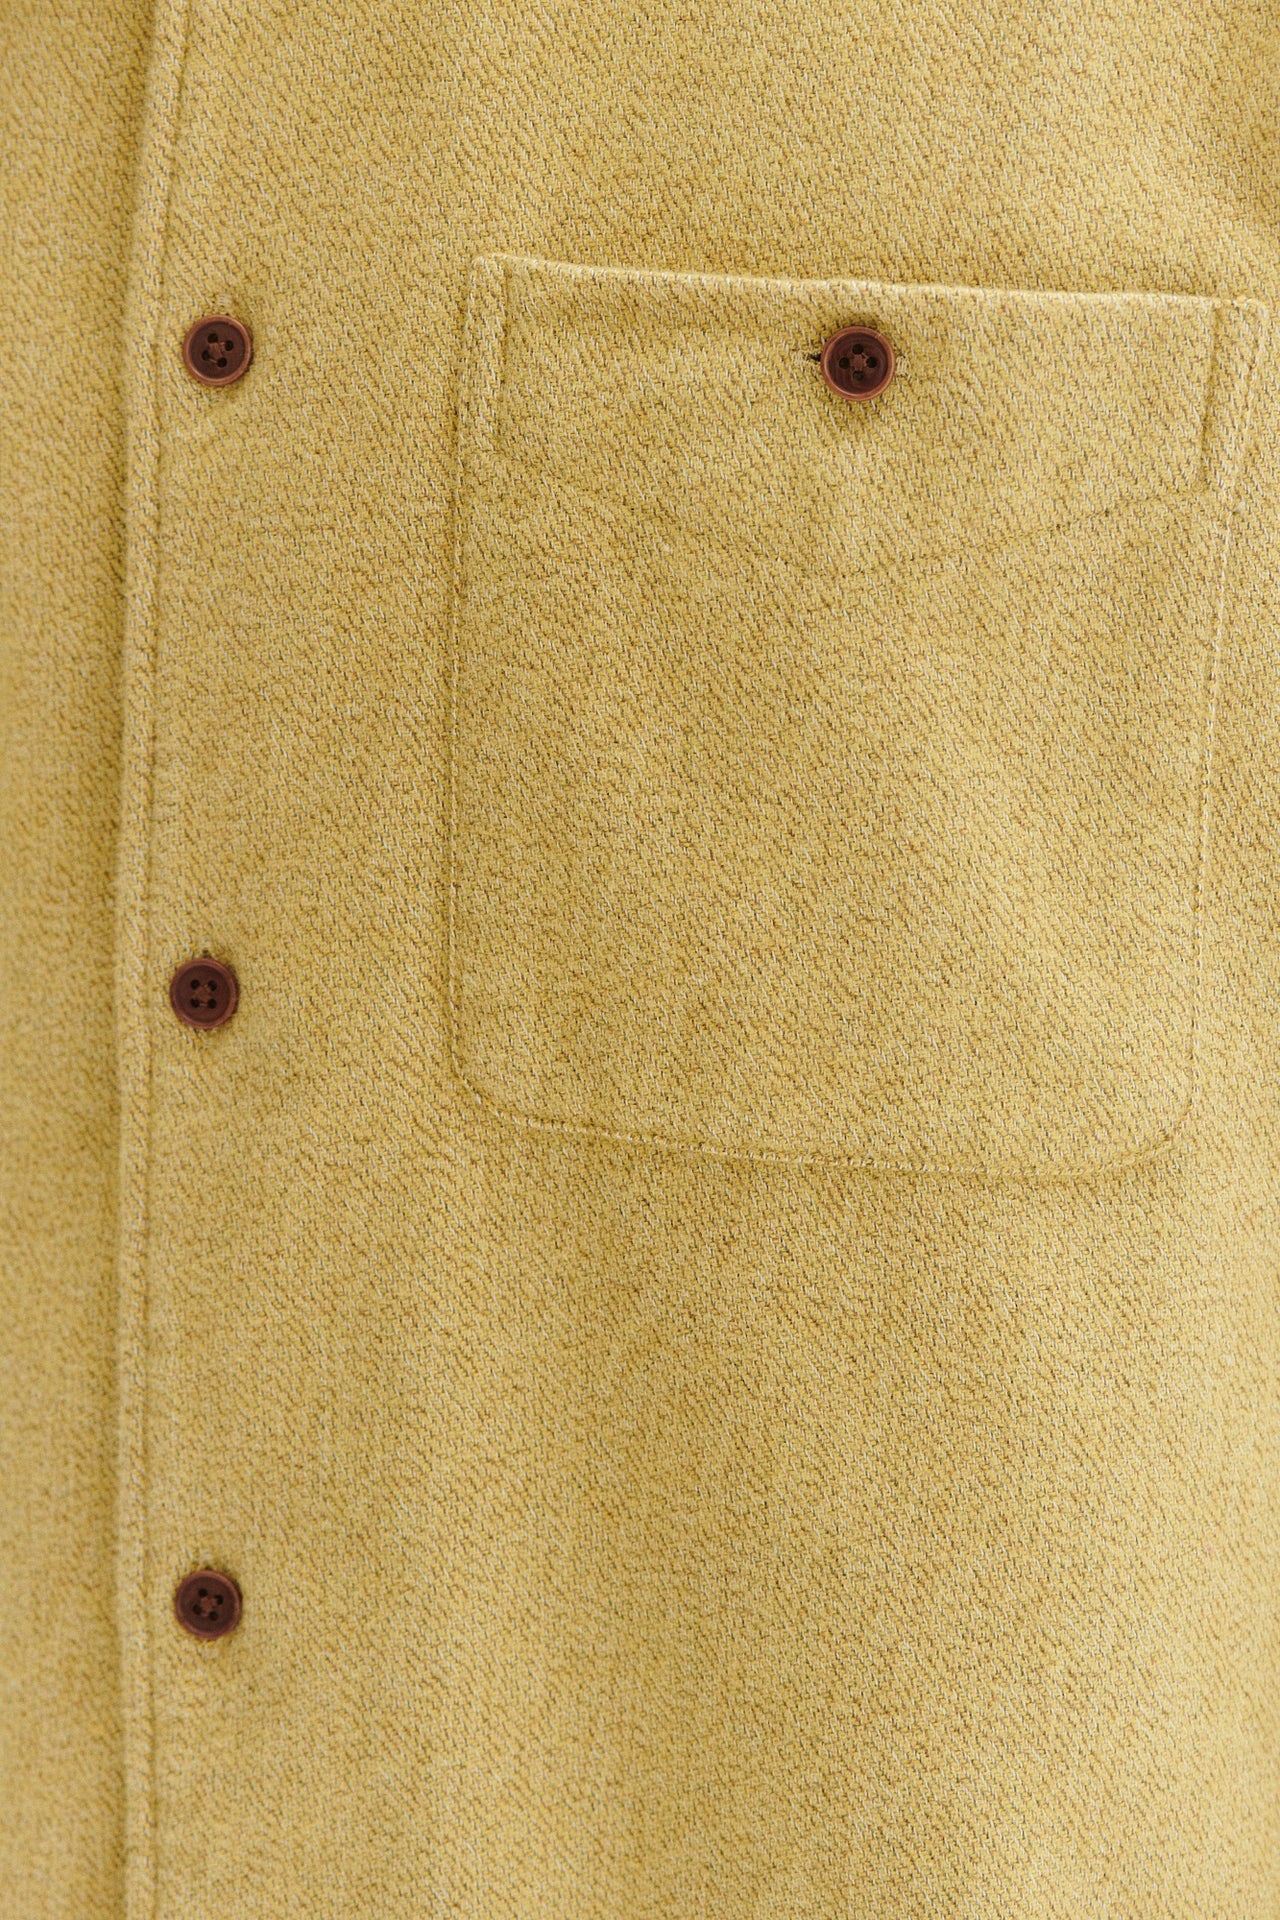 Strong Shirt in the Finest Portuguese Flannel in Mélange Yellow and Beige with corozzo buttons